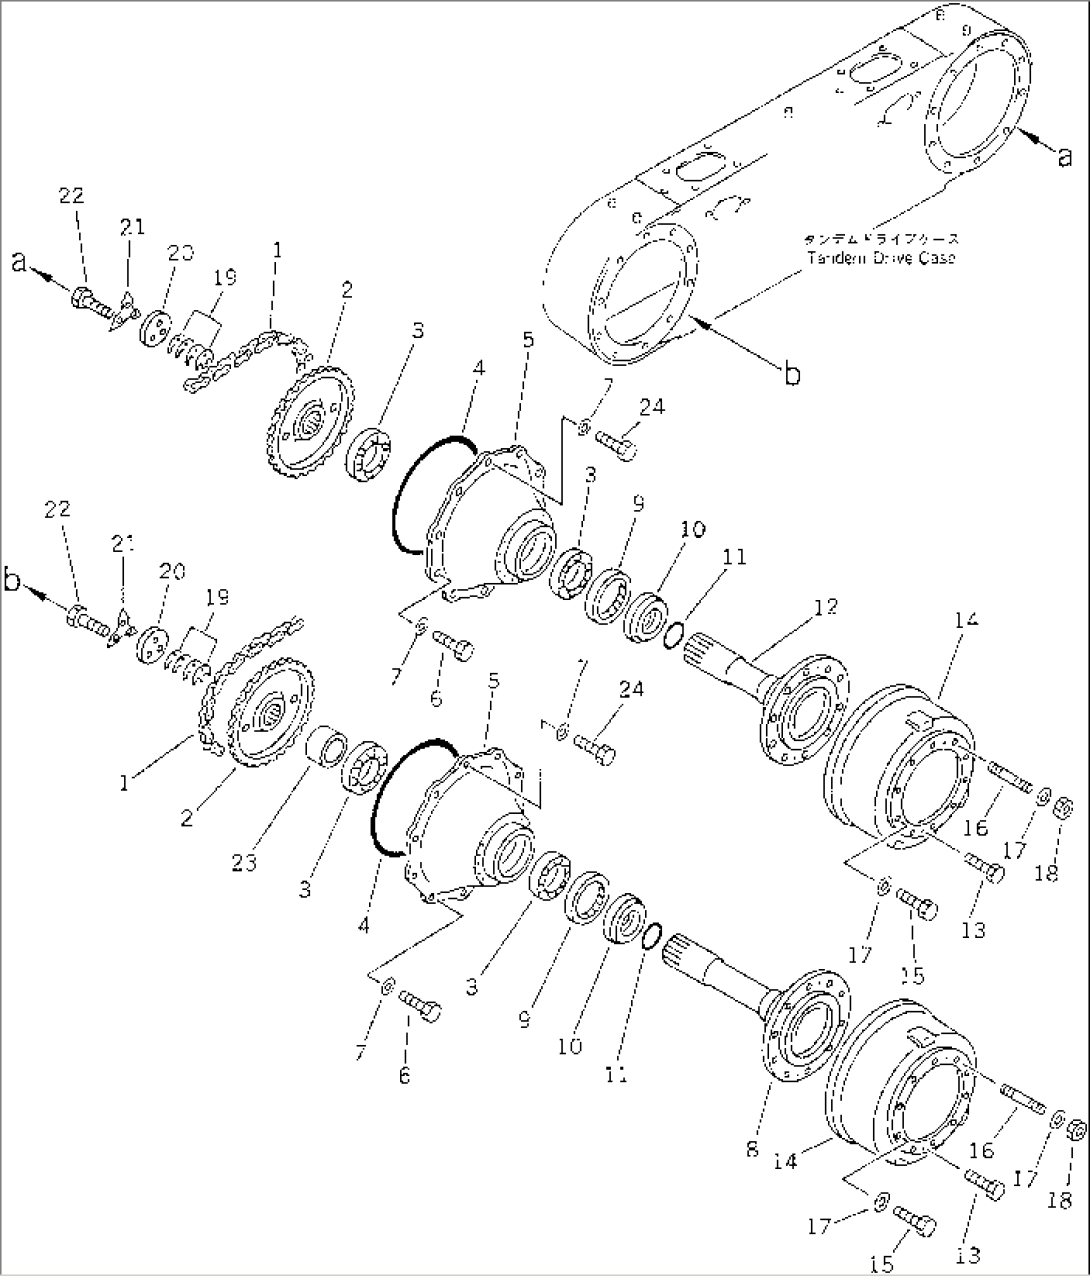 TANDEM DRIVE GEAR AND CHAIN(#30095-)